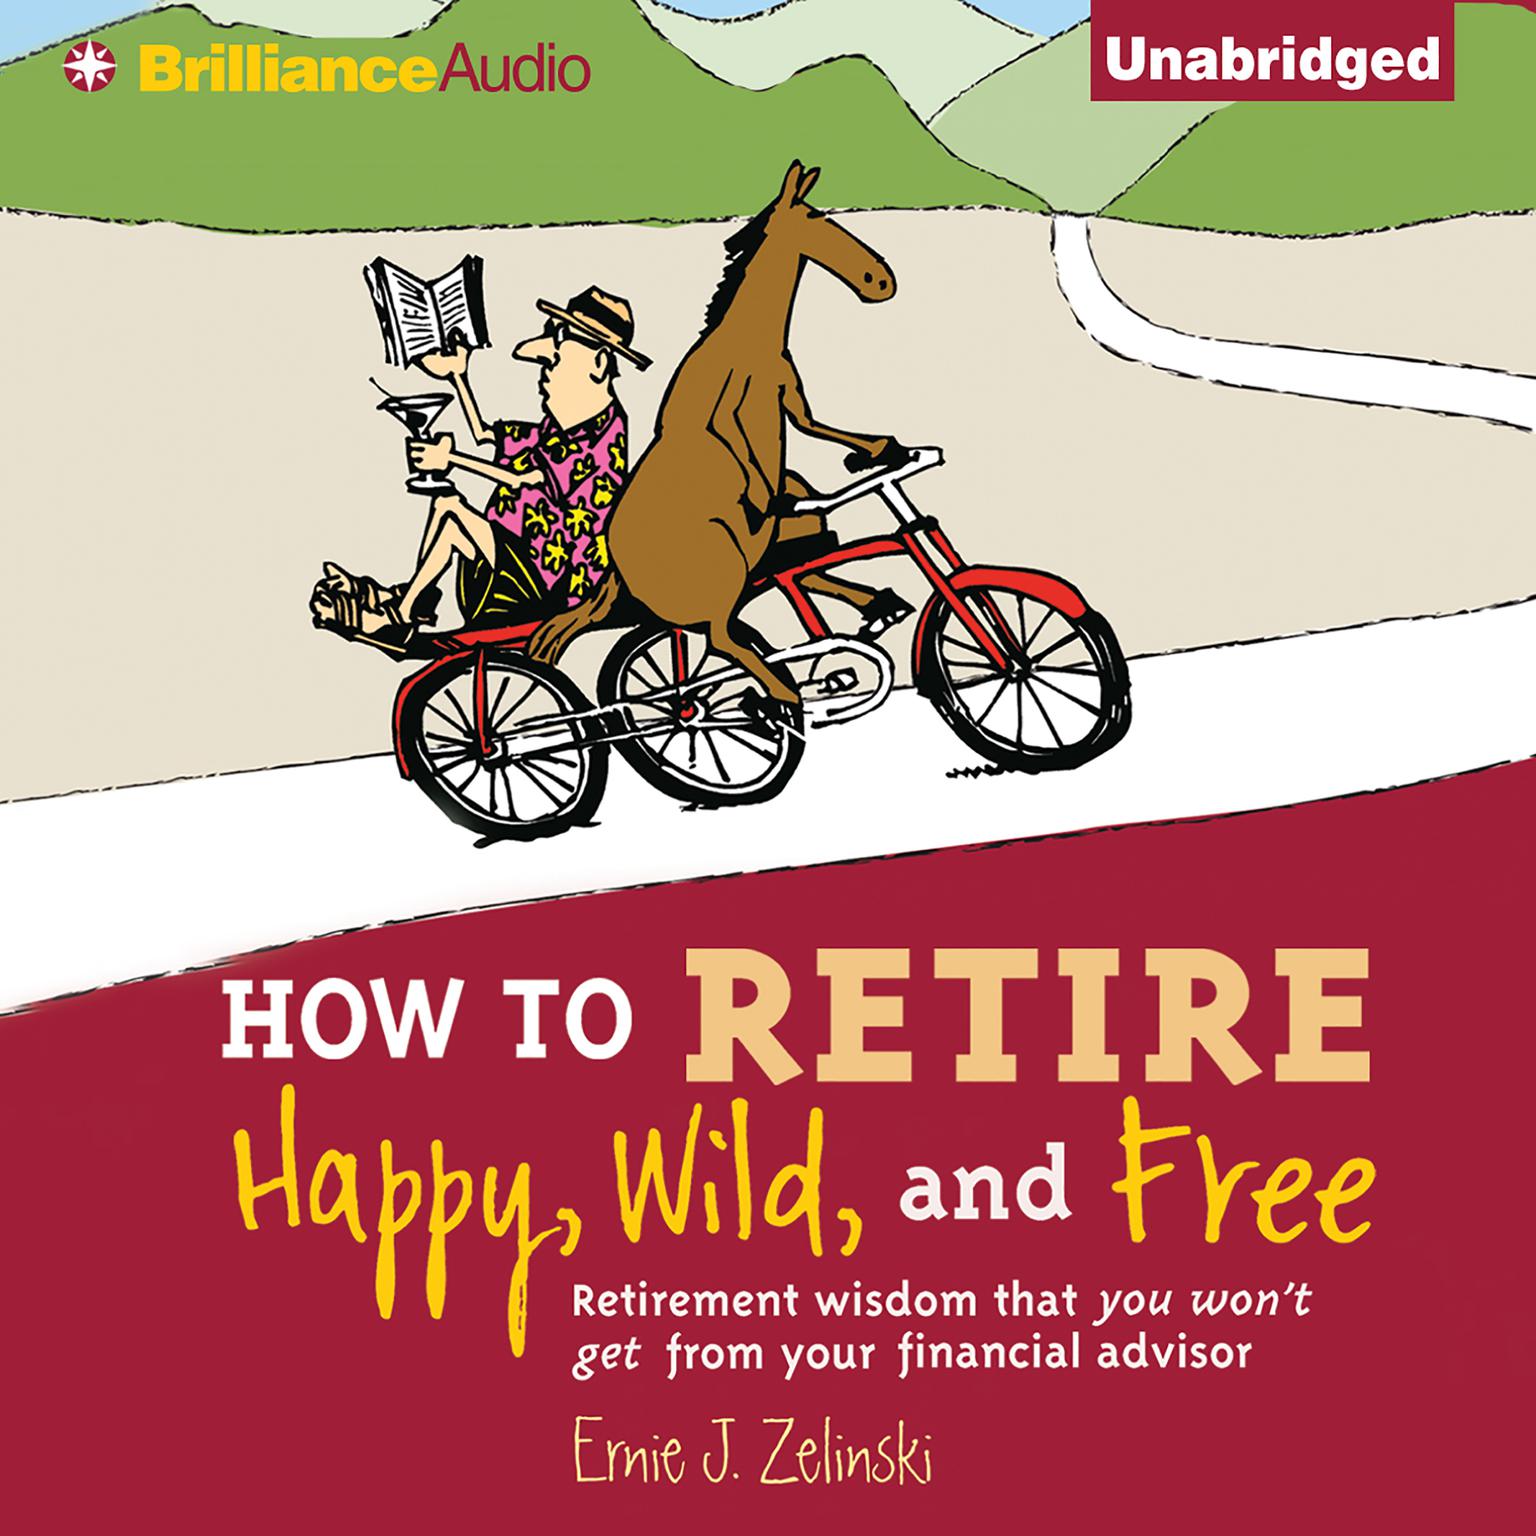 How to Retire Happy, Wild, and Free: Retirement Wisdom That You Wont Get from Your Financial Advisor Audiobook, by Ernie J. Zelinski